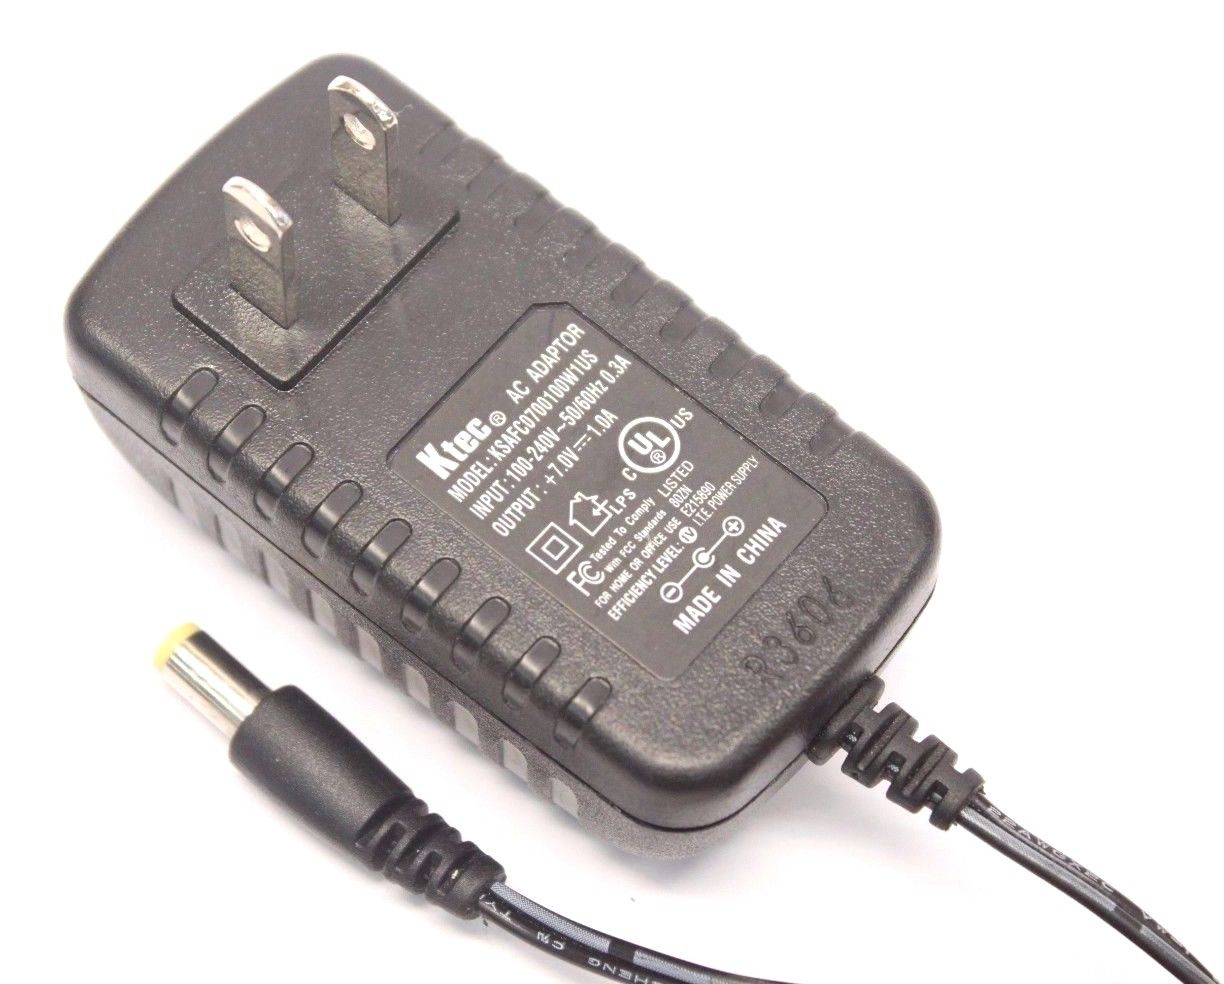 Genuine 7.0V 1.0A 7 Volt Ktec KSAFC0700100W1US AC DC Power Supply Adapter Charger